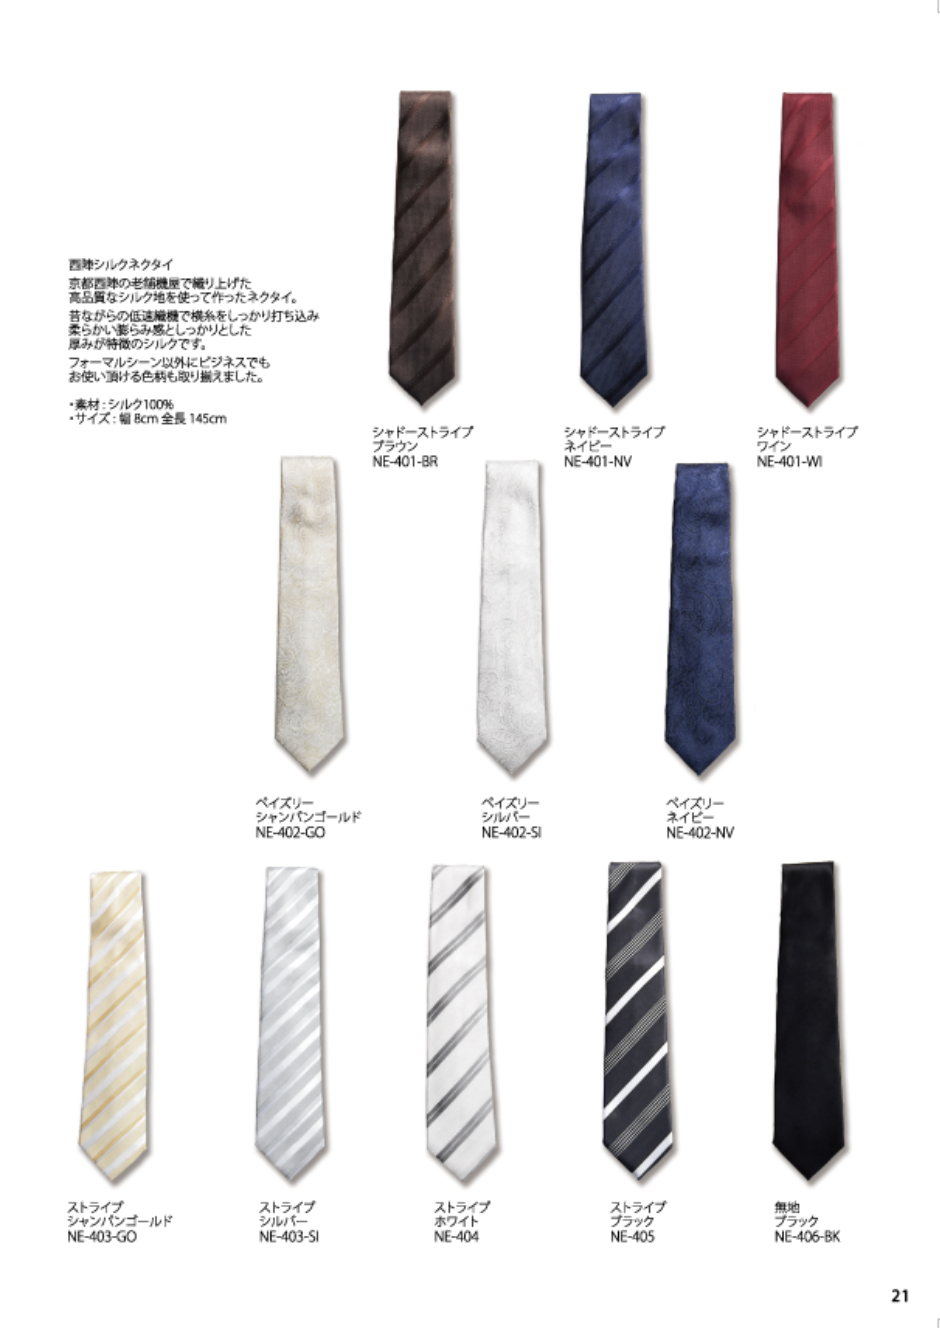 EXCY FORMAL ACCESSORY COLLECTION Vol.8 pg.21